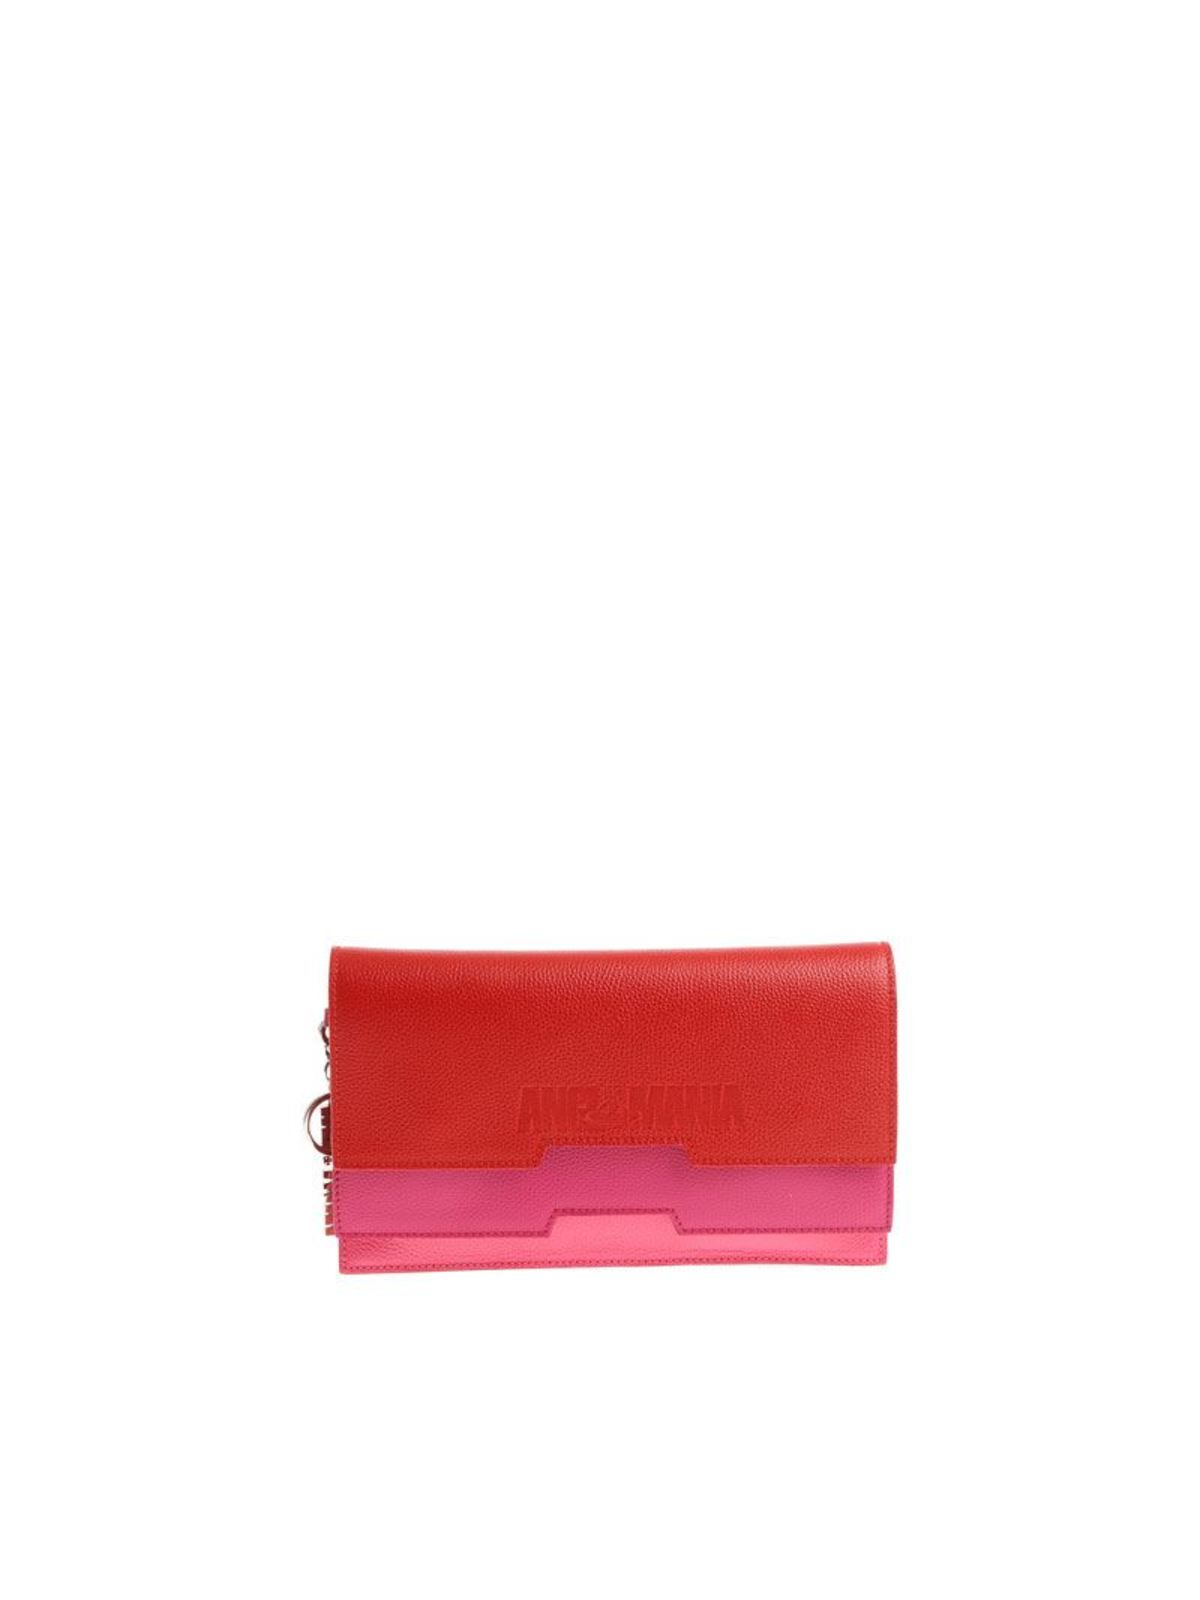 Vivienne Westwood Anglomania Grainy Leather Clutch In Rosado